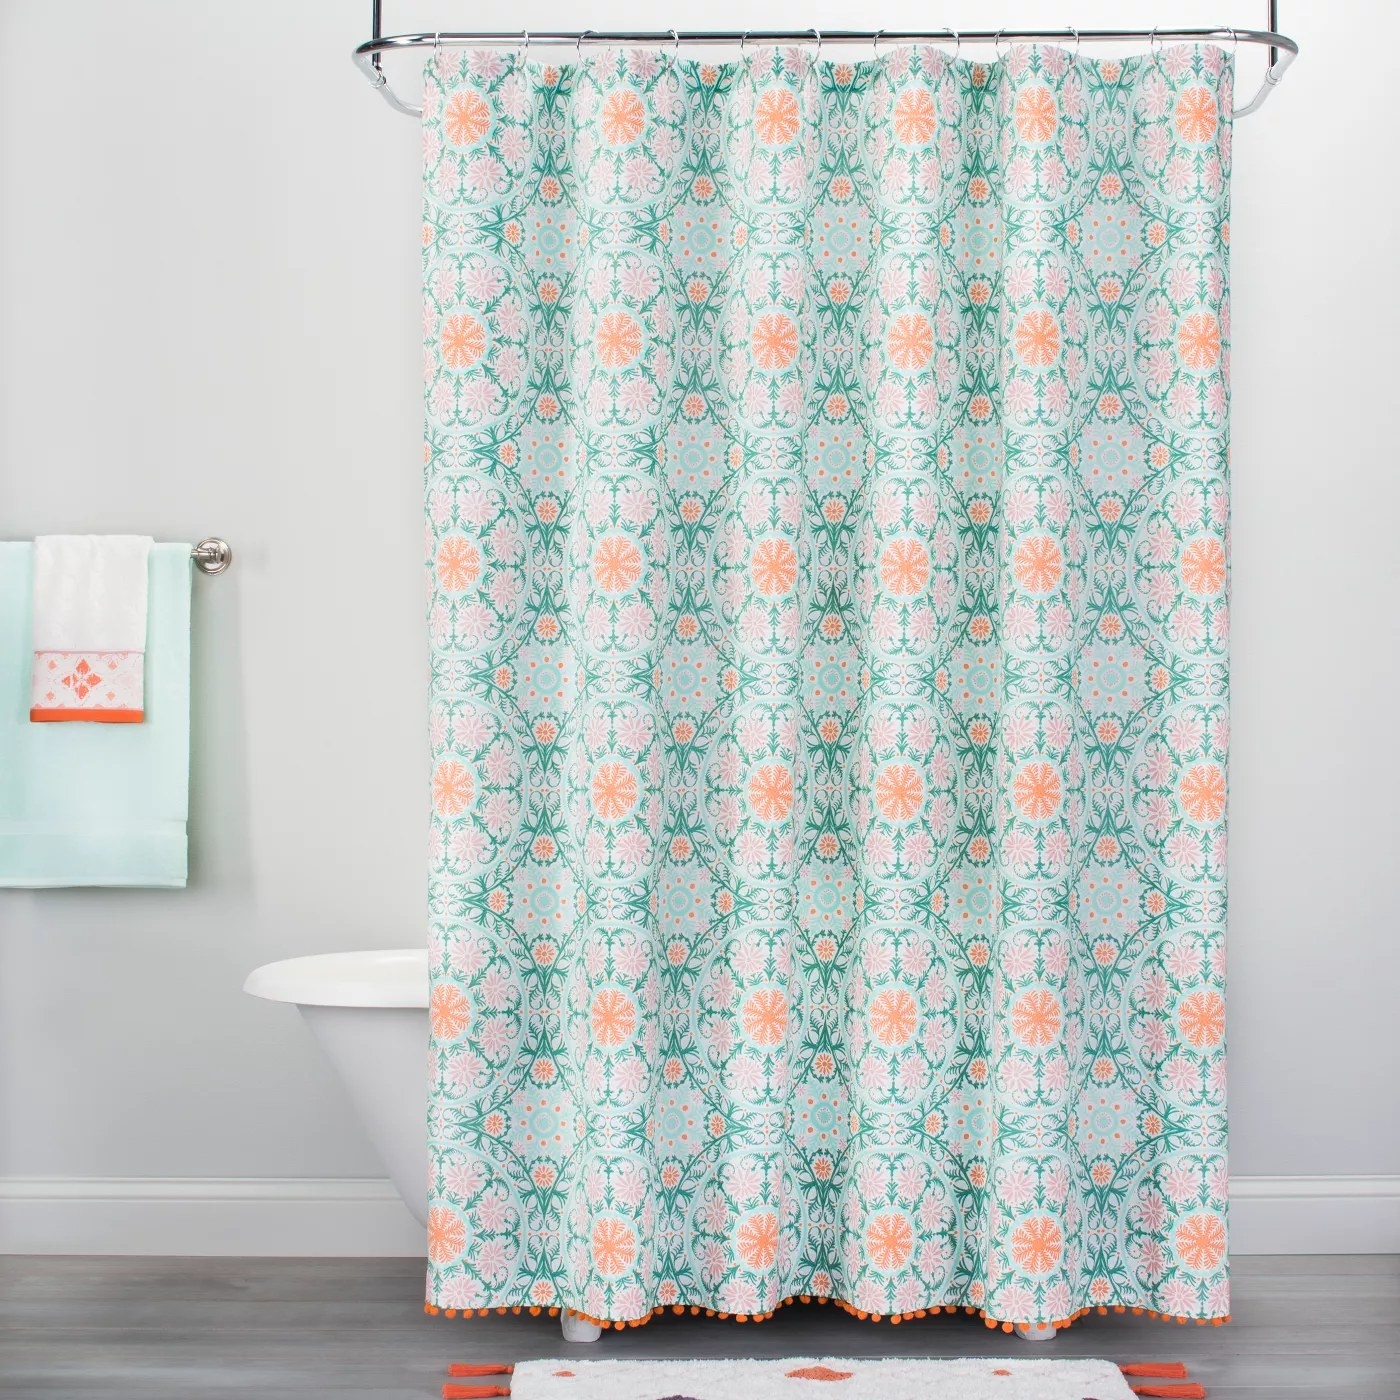 The green and orange shower curtain with a medallion print and pom poms along the bottom hanging in a shower